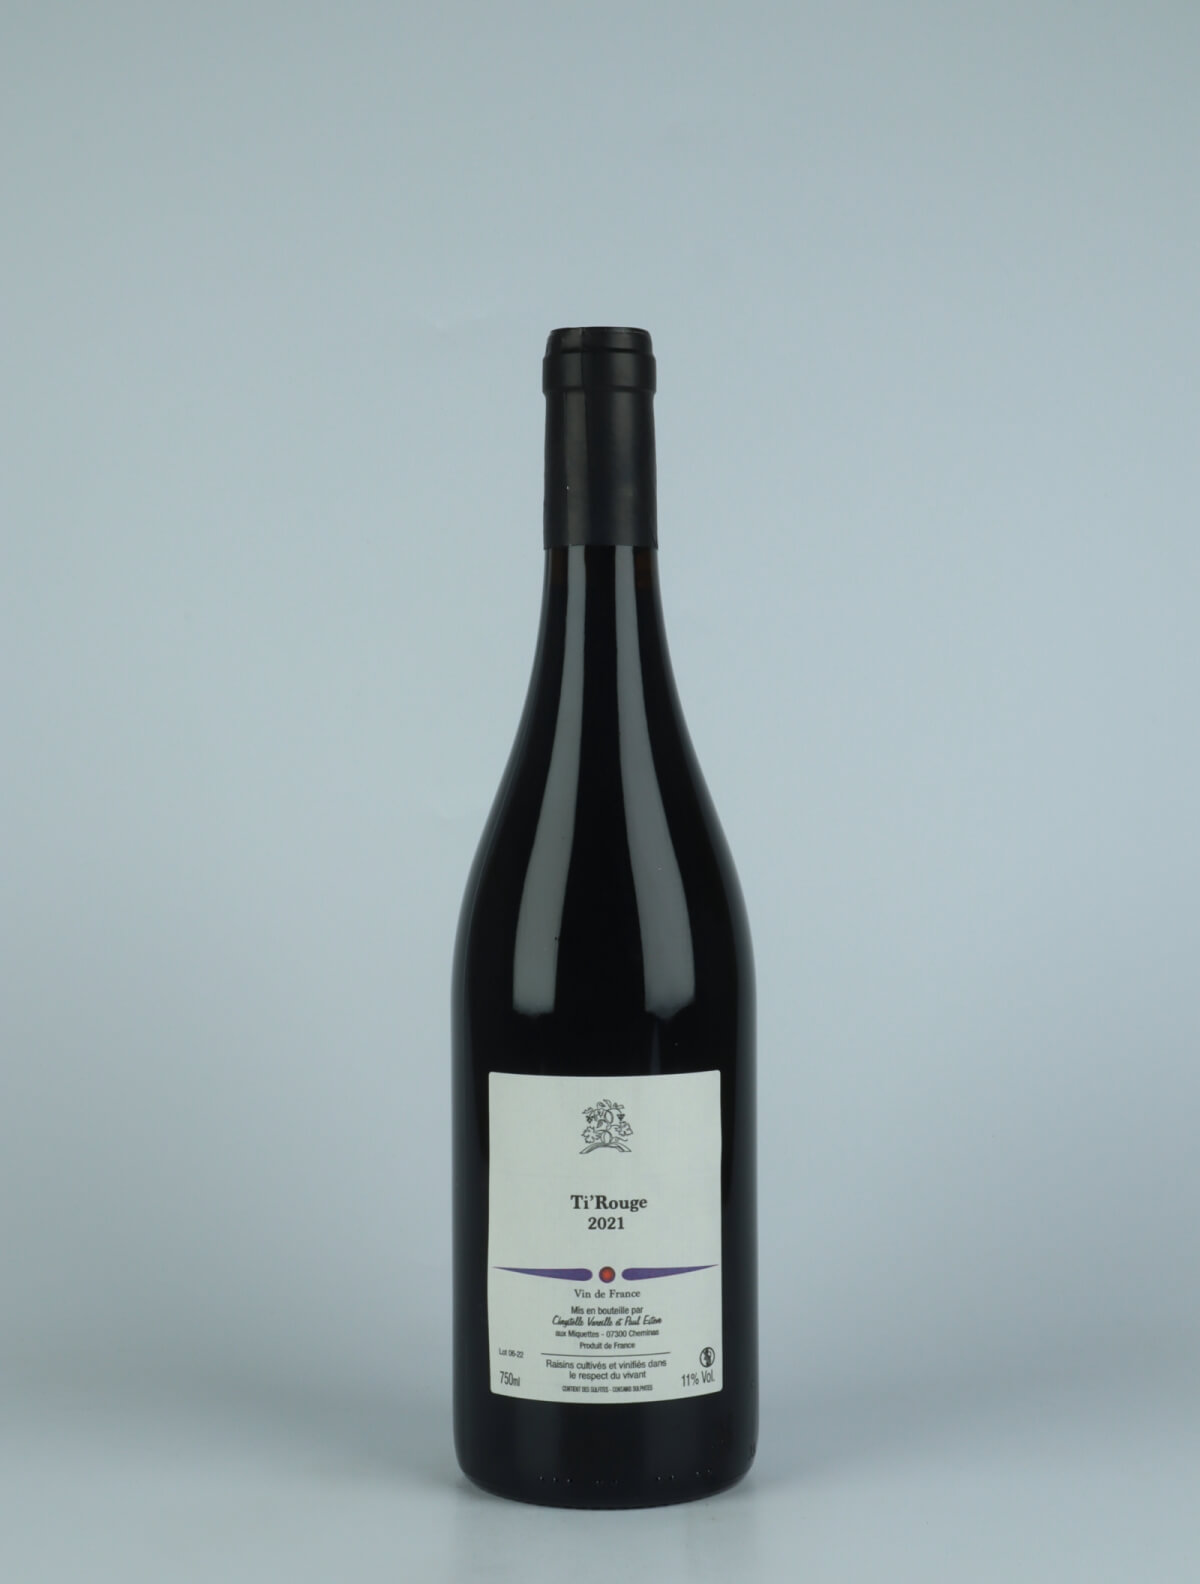 A bottle 2021 Ti'Rouge Red wine from Domaine des Miquettes, Rhône in France